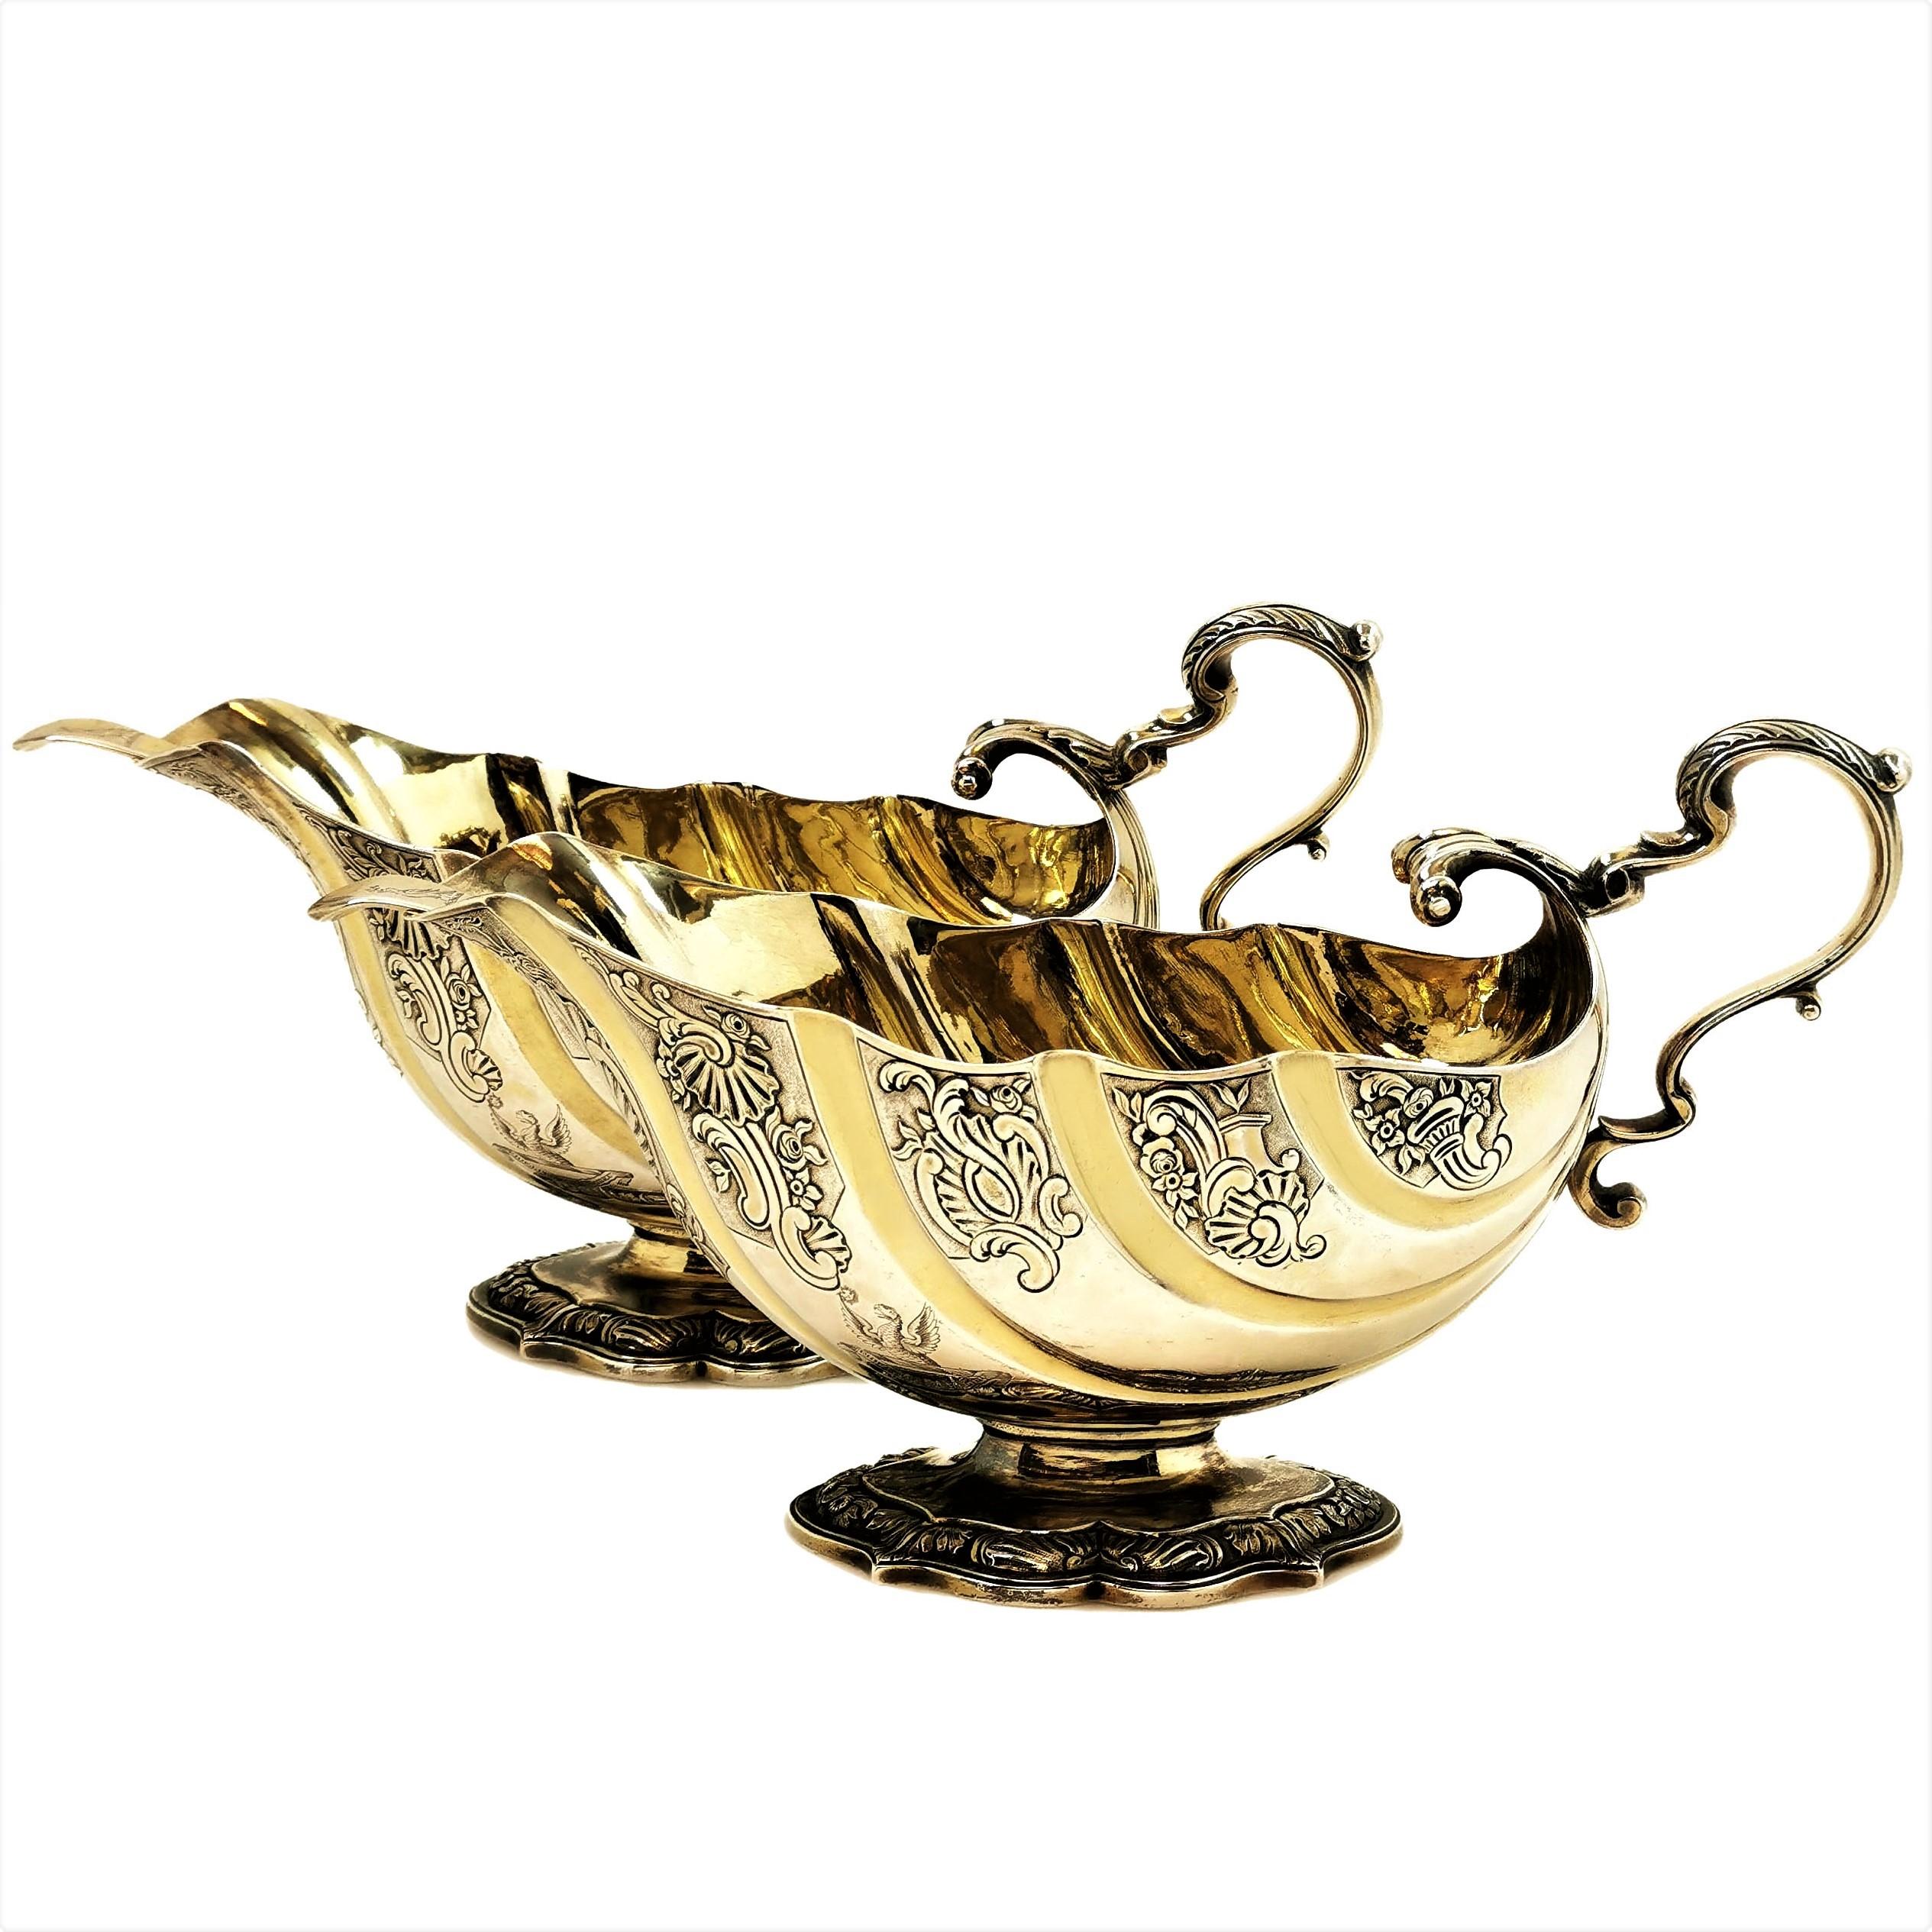 A magnificent pair of Antique George III sterling Silver Sauce Boats in an impressive Rocco Revival Style, referencing the Rococo designs of the 1740s. The Gravy Boats have a beautiful stylised shell shape and are decorated with chased designs.